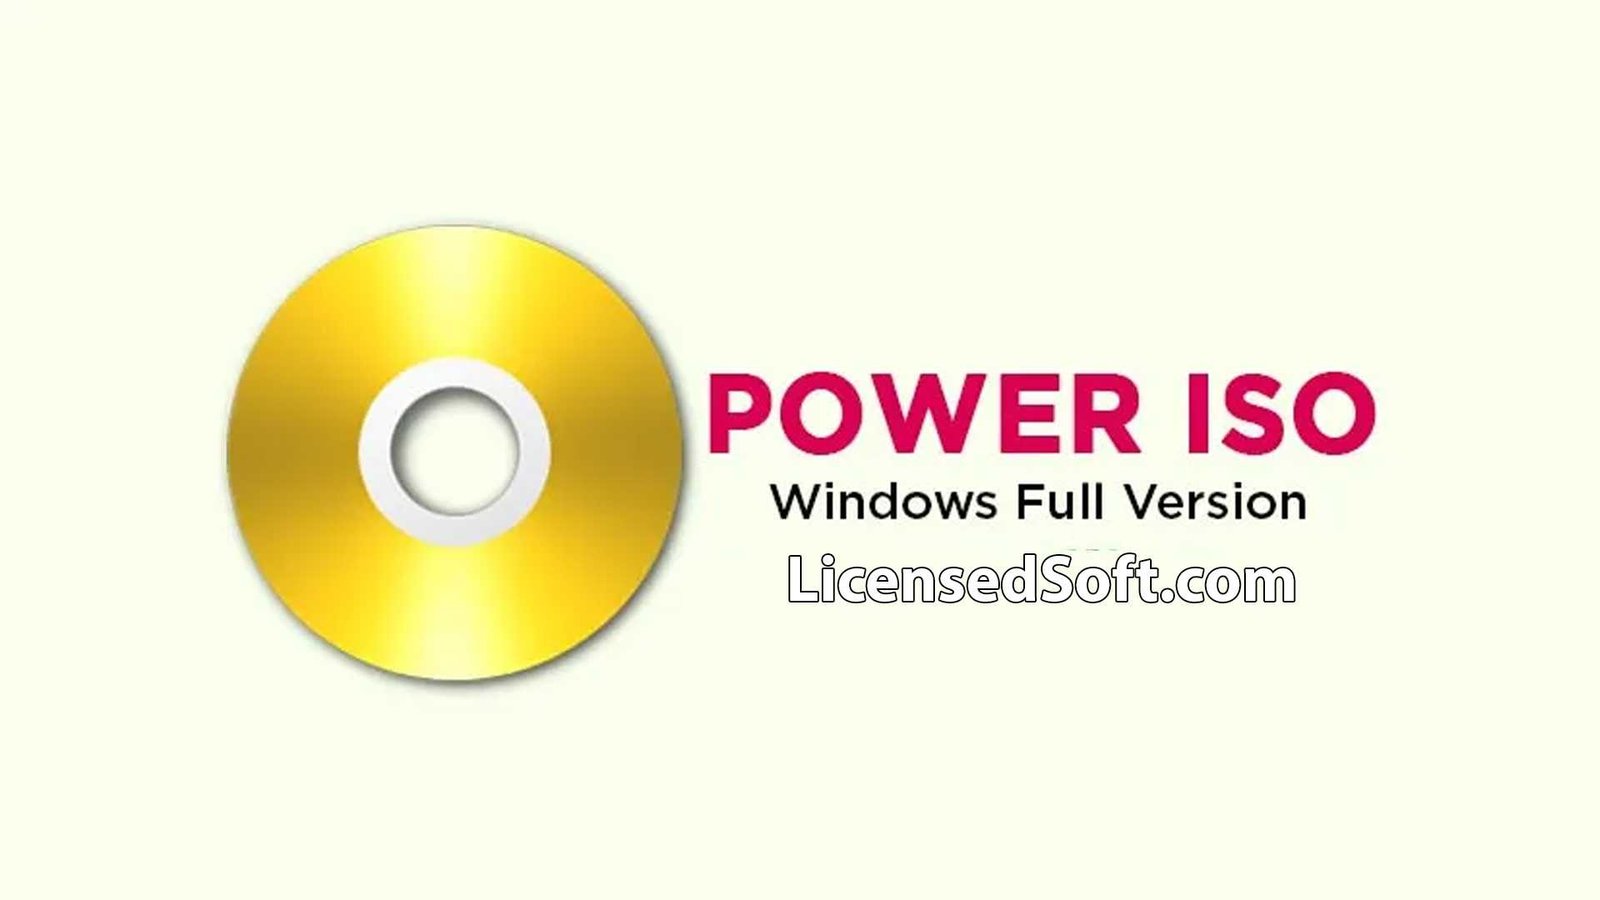 PowerISO 8.6.0 Full Premium Cover Image By LicensedSoft